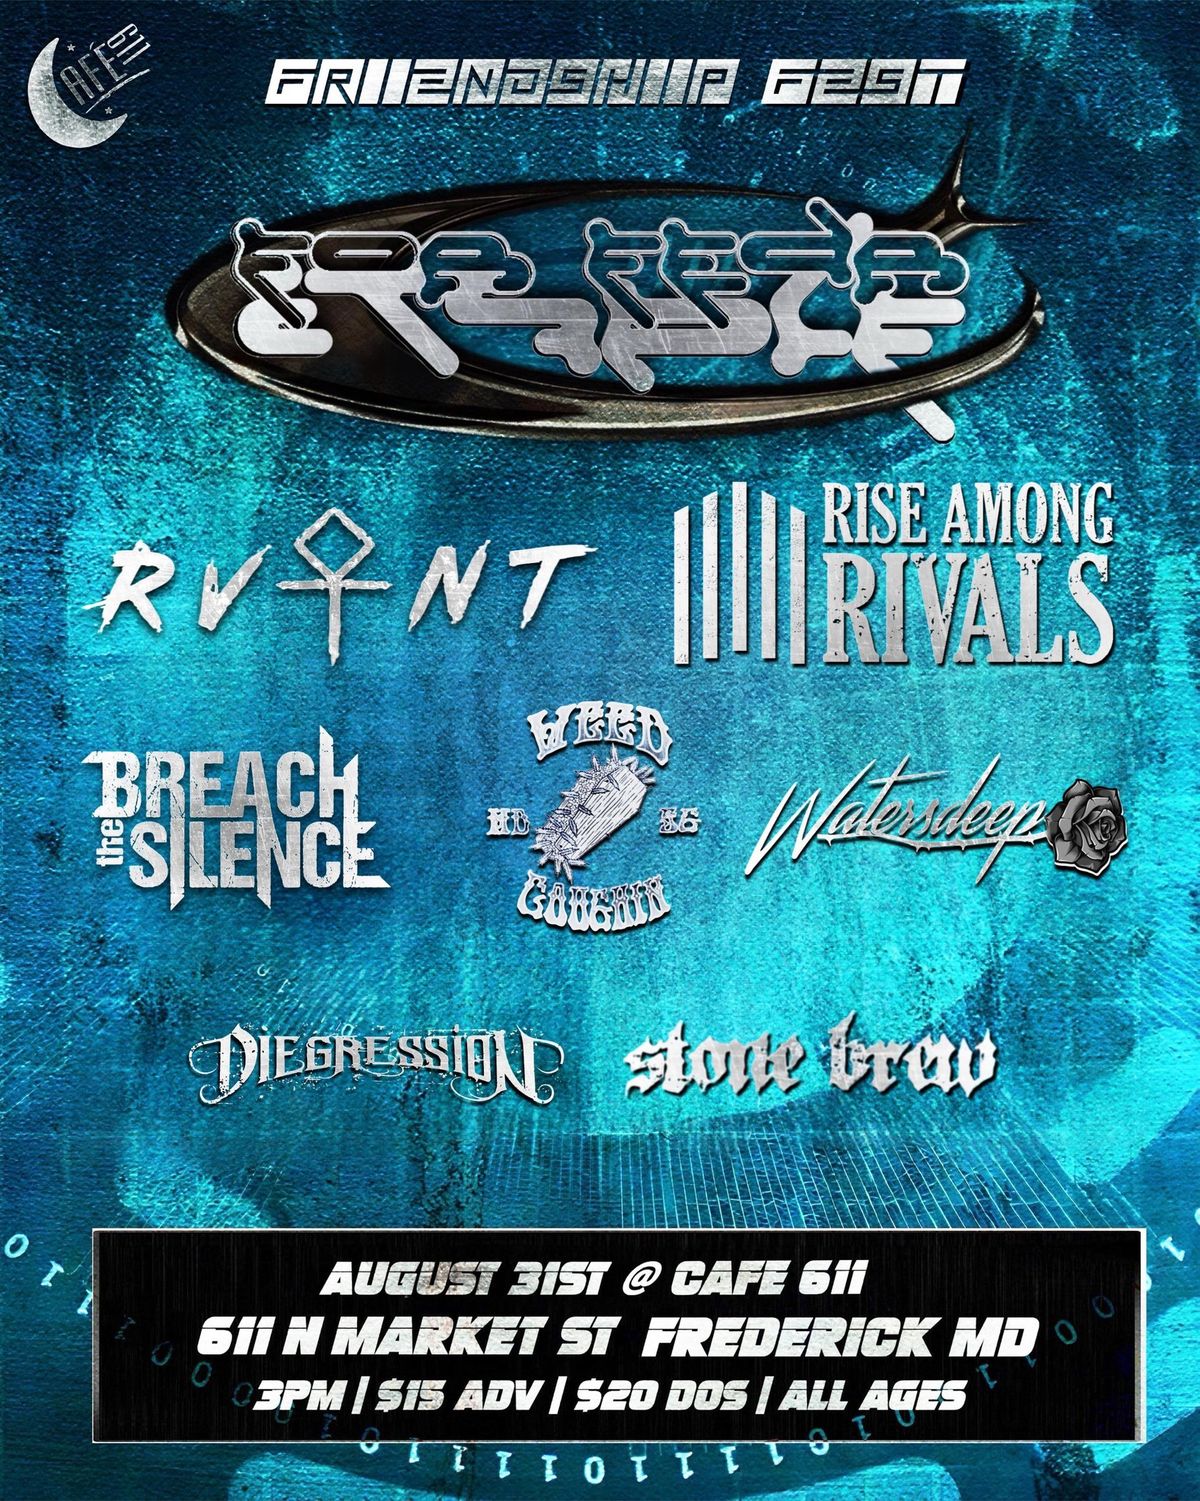 FORFEARITSELF\/RVNT\/RISEAMONGRIVALS\/DIEGRESSION\/BREACH THE SILENCE\/WATERSDEEP\/WEEDCOUGHIN\/STONEBRE @ Cafe 611